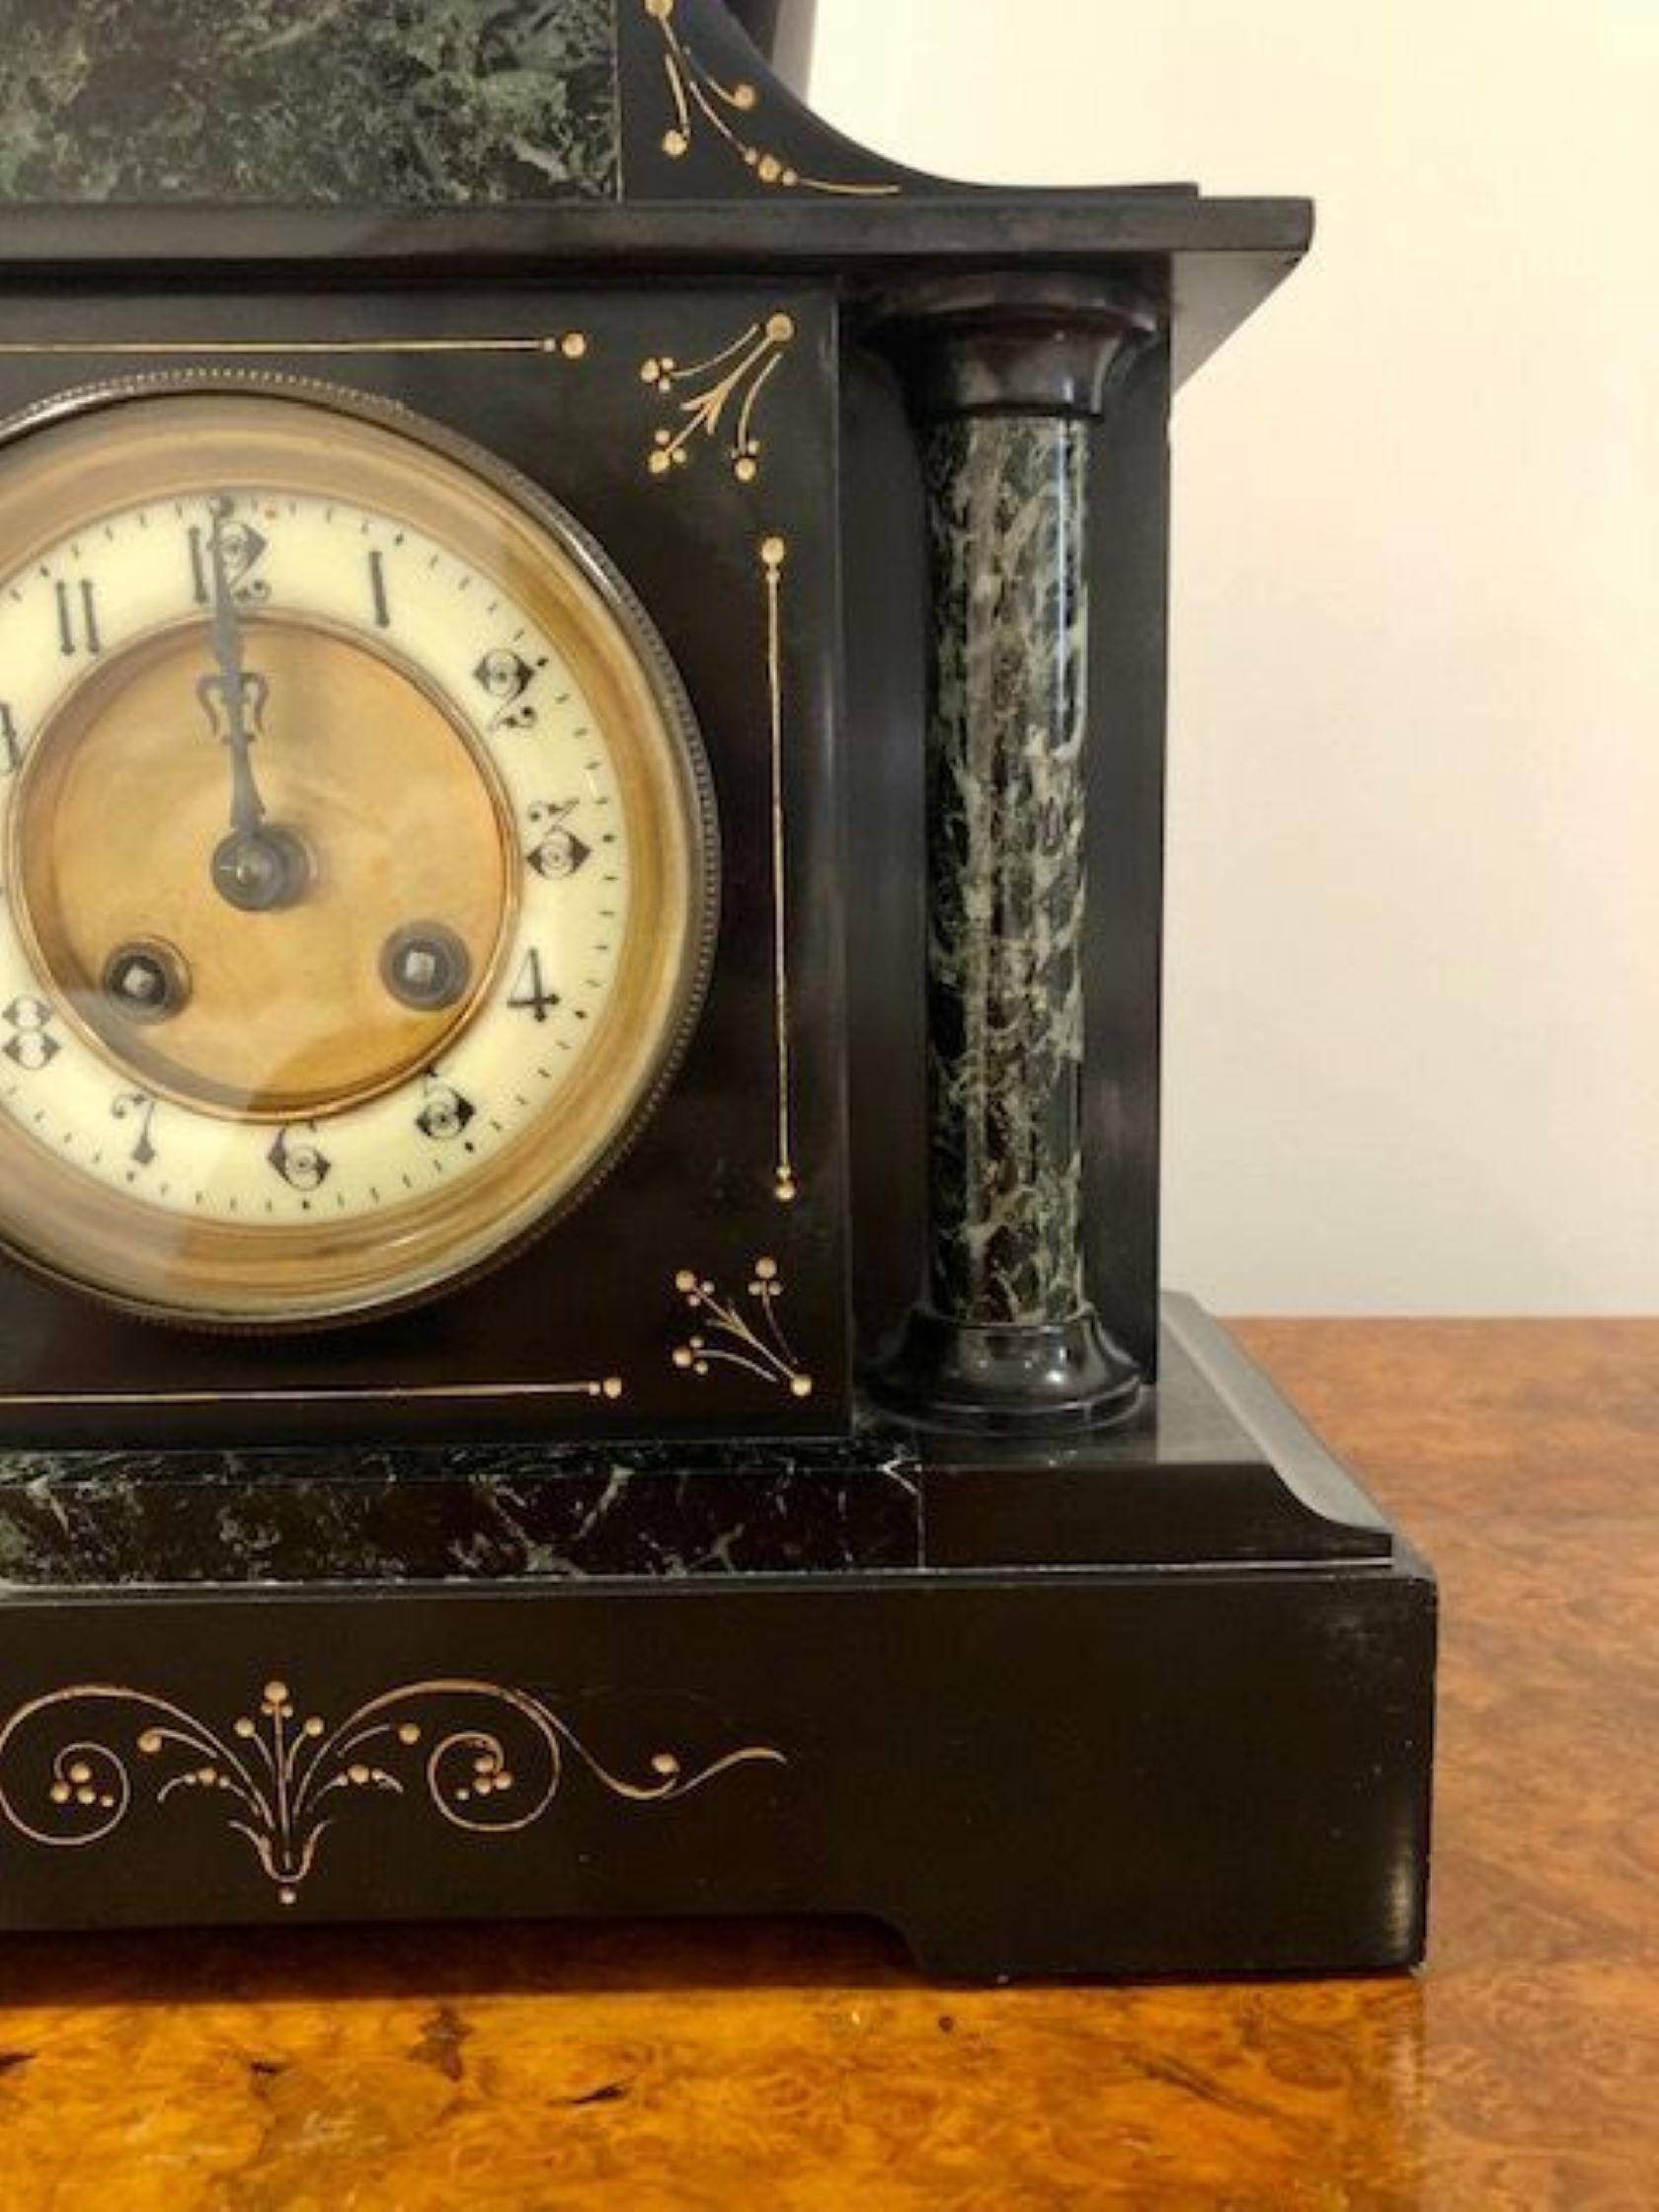 Quality antique Victorian marble mantle clock with Arabic numerals on a cream chapter ring, Brass detail surrounding, with a 8 day French movement striking on the hour and half hour on a gong with the original hands and key
Please note all of our